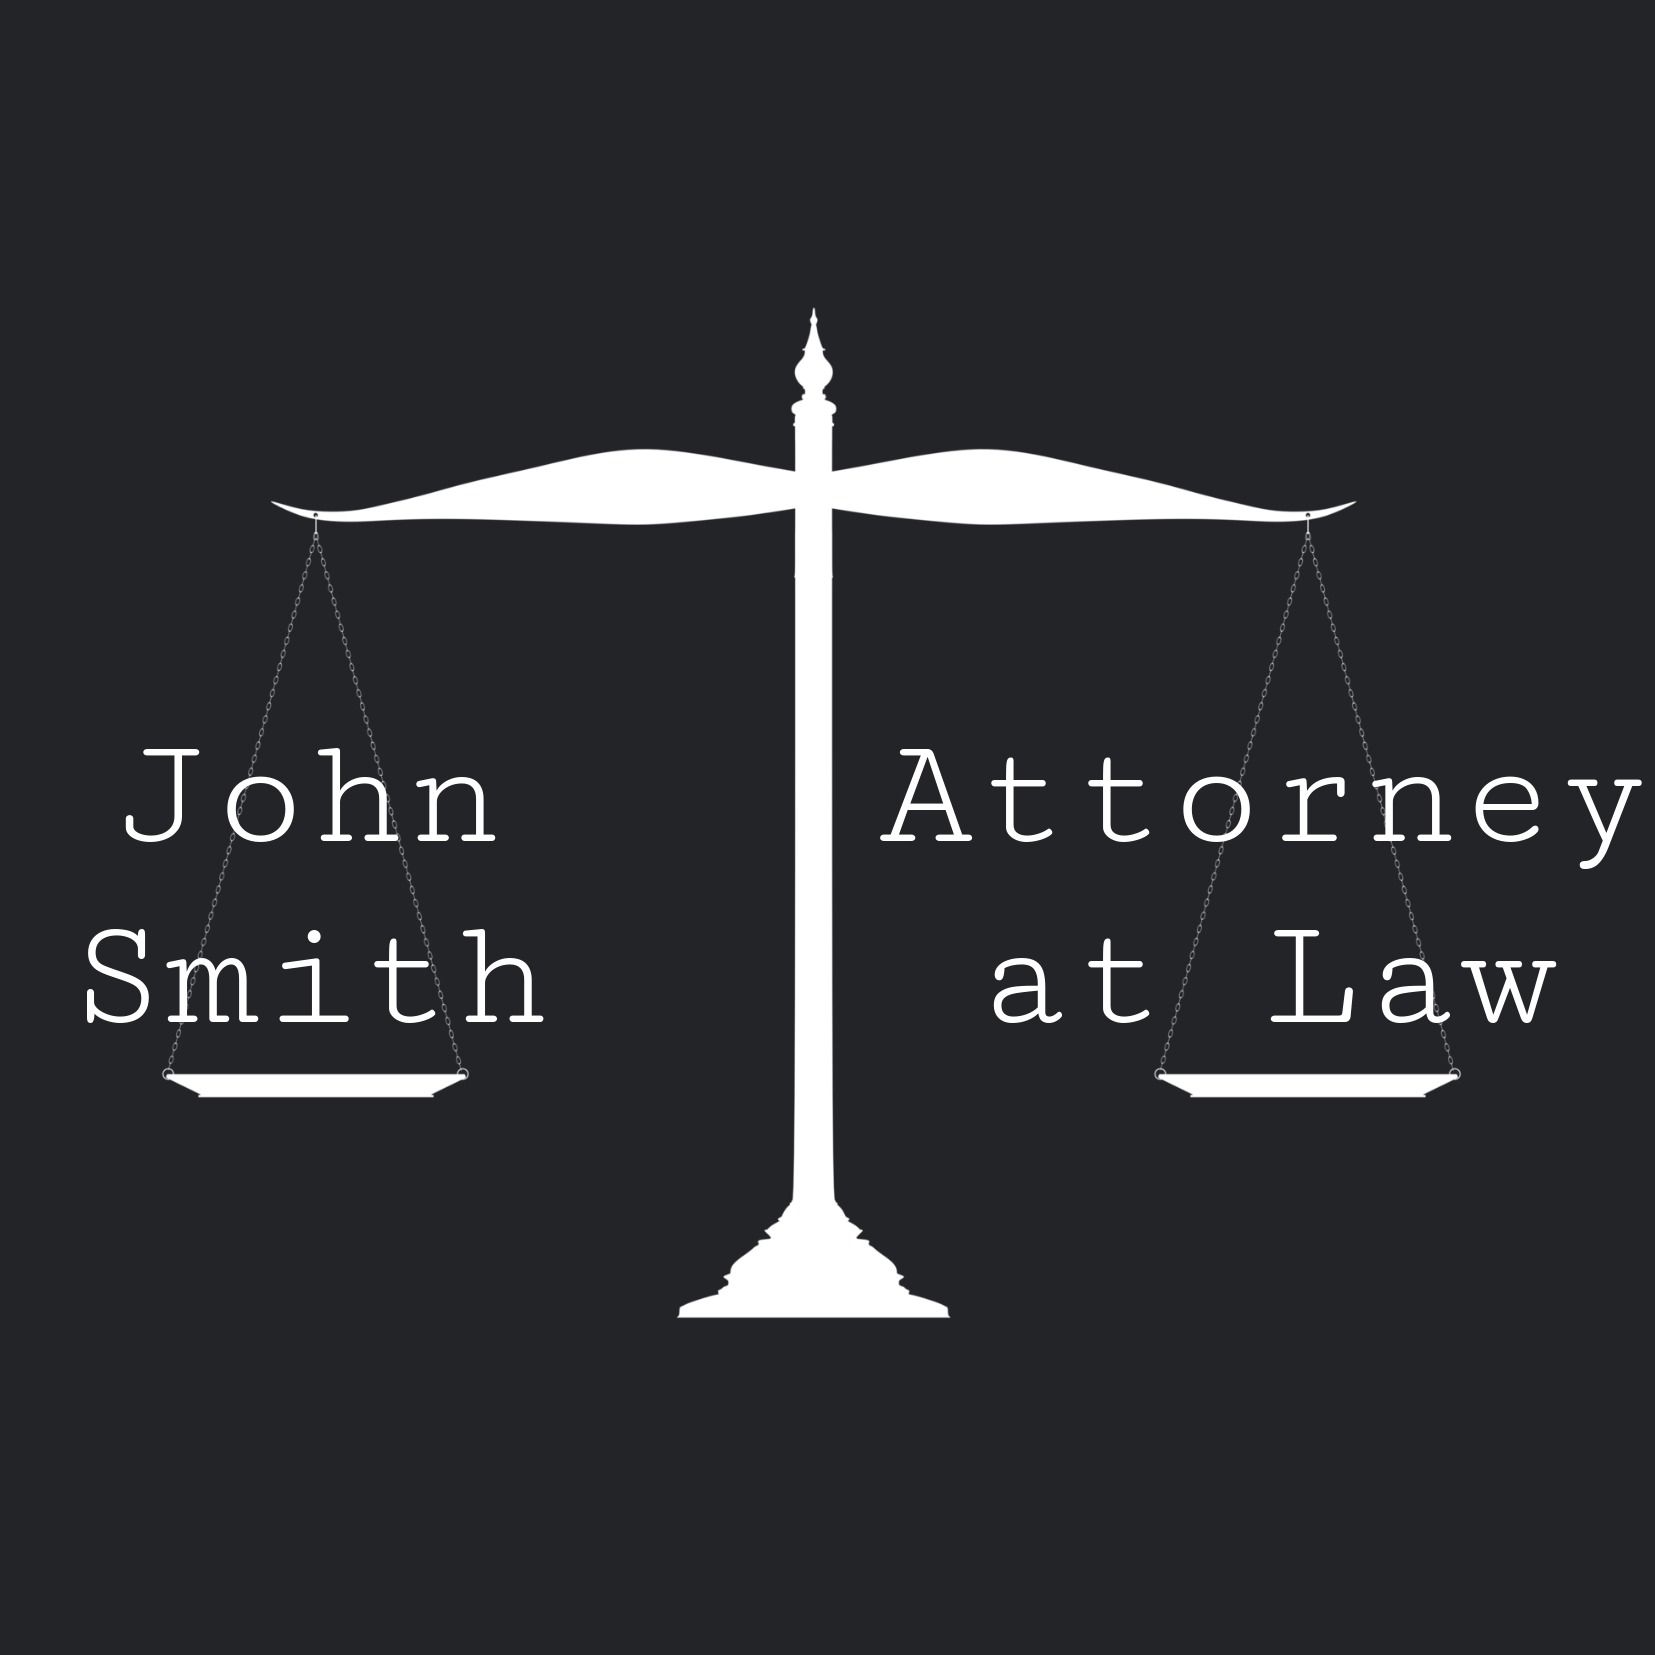 Attorney at law logo with scales of justice on a dark background - The best working scenarios for the Cutive Mono font - Image